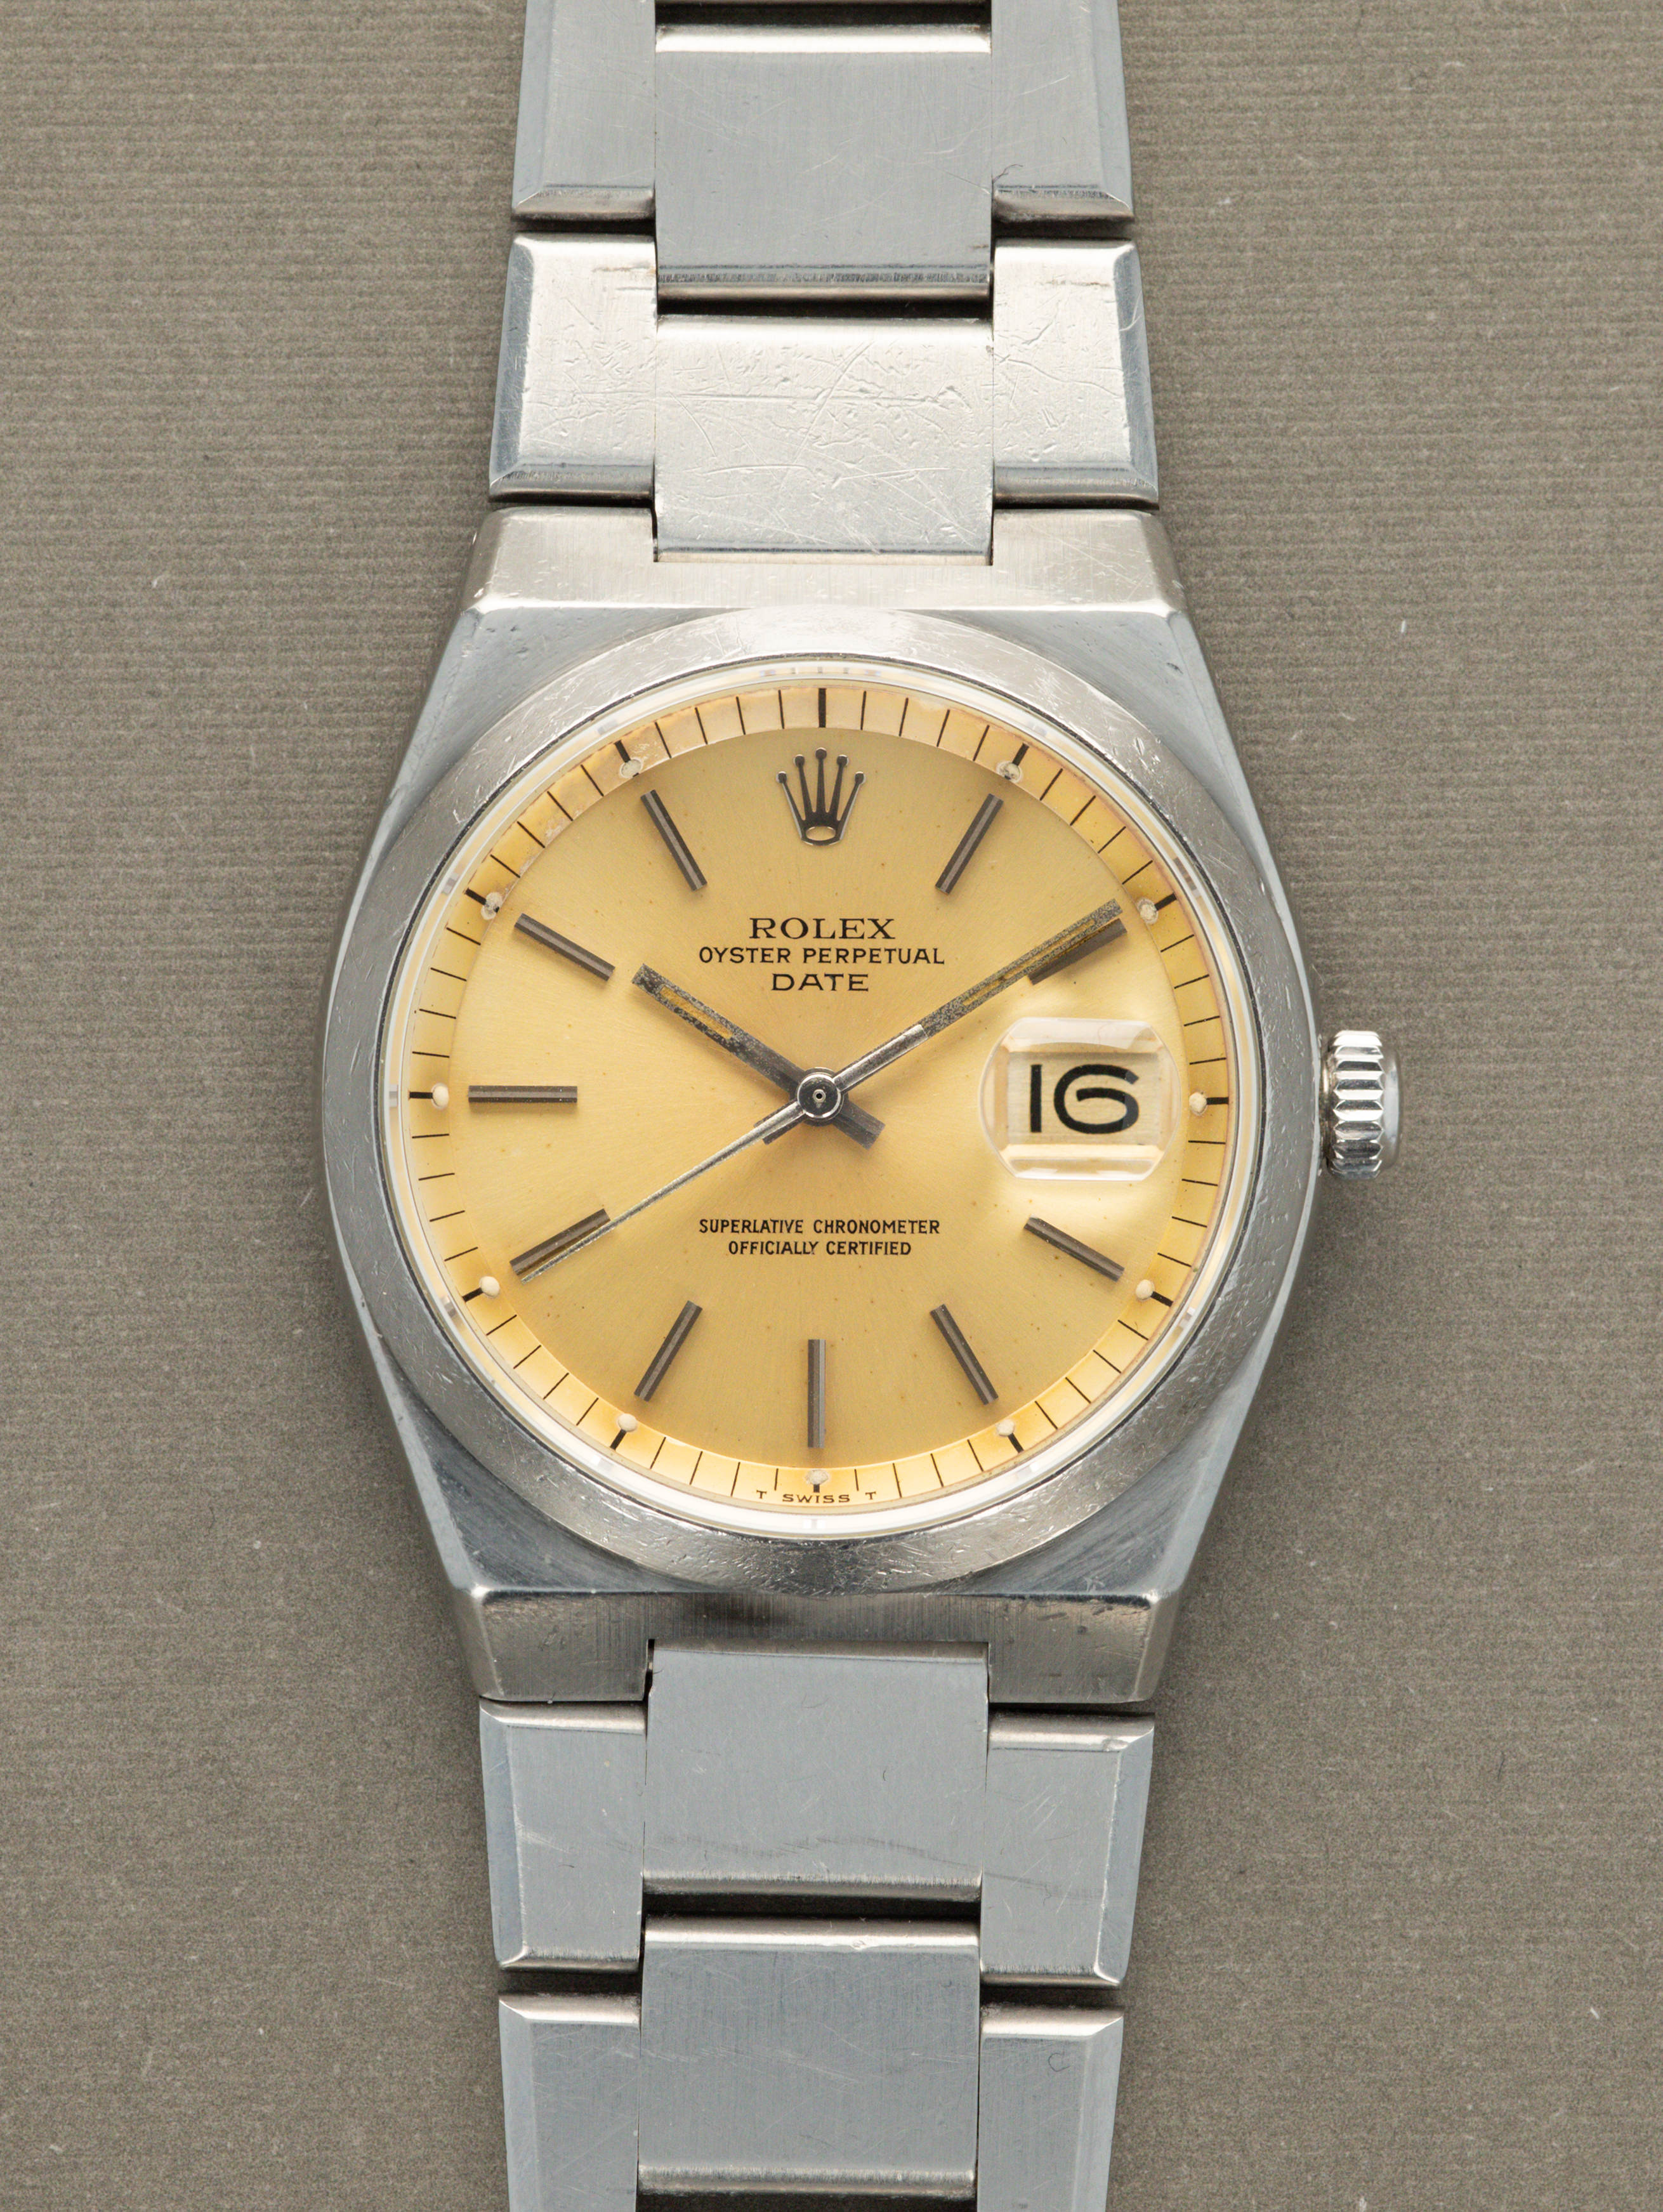 Rolex Oyster Perpetual Date Ref. 1530 - Unpolished